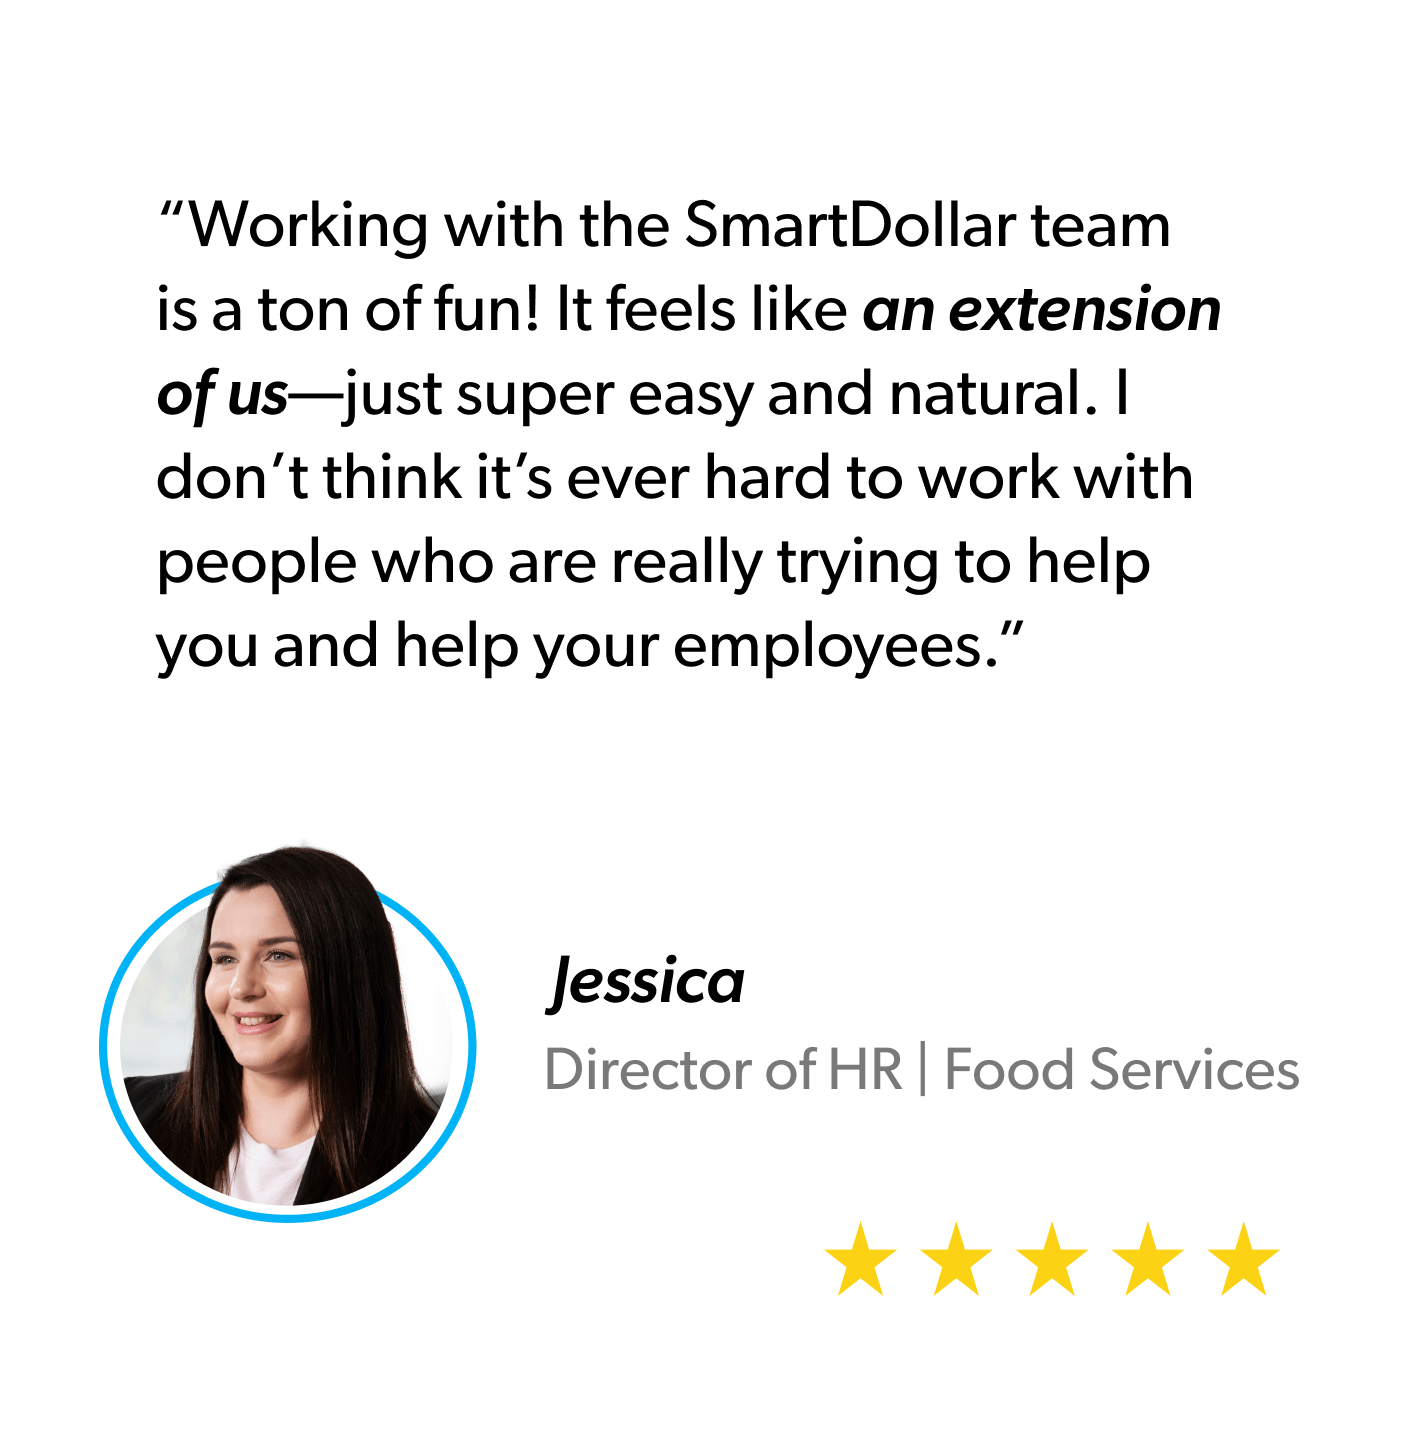 “Working with the SmartDollar team is a ton of fun! It feels like an extension of us—just super easy and natural. I don’t think it’s ever hard to work with people who are really trying to help you and help your employees.” - Jessica, Director of HR, Food Services